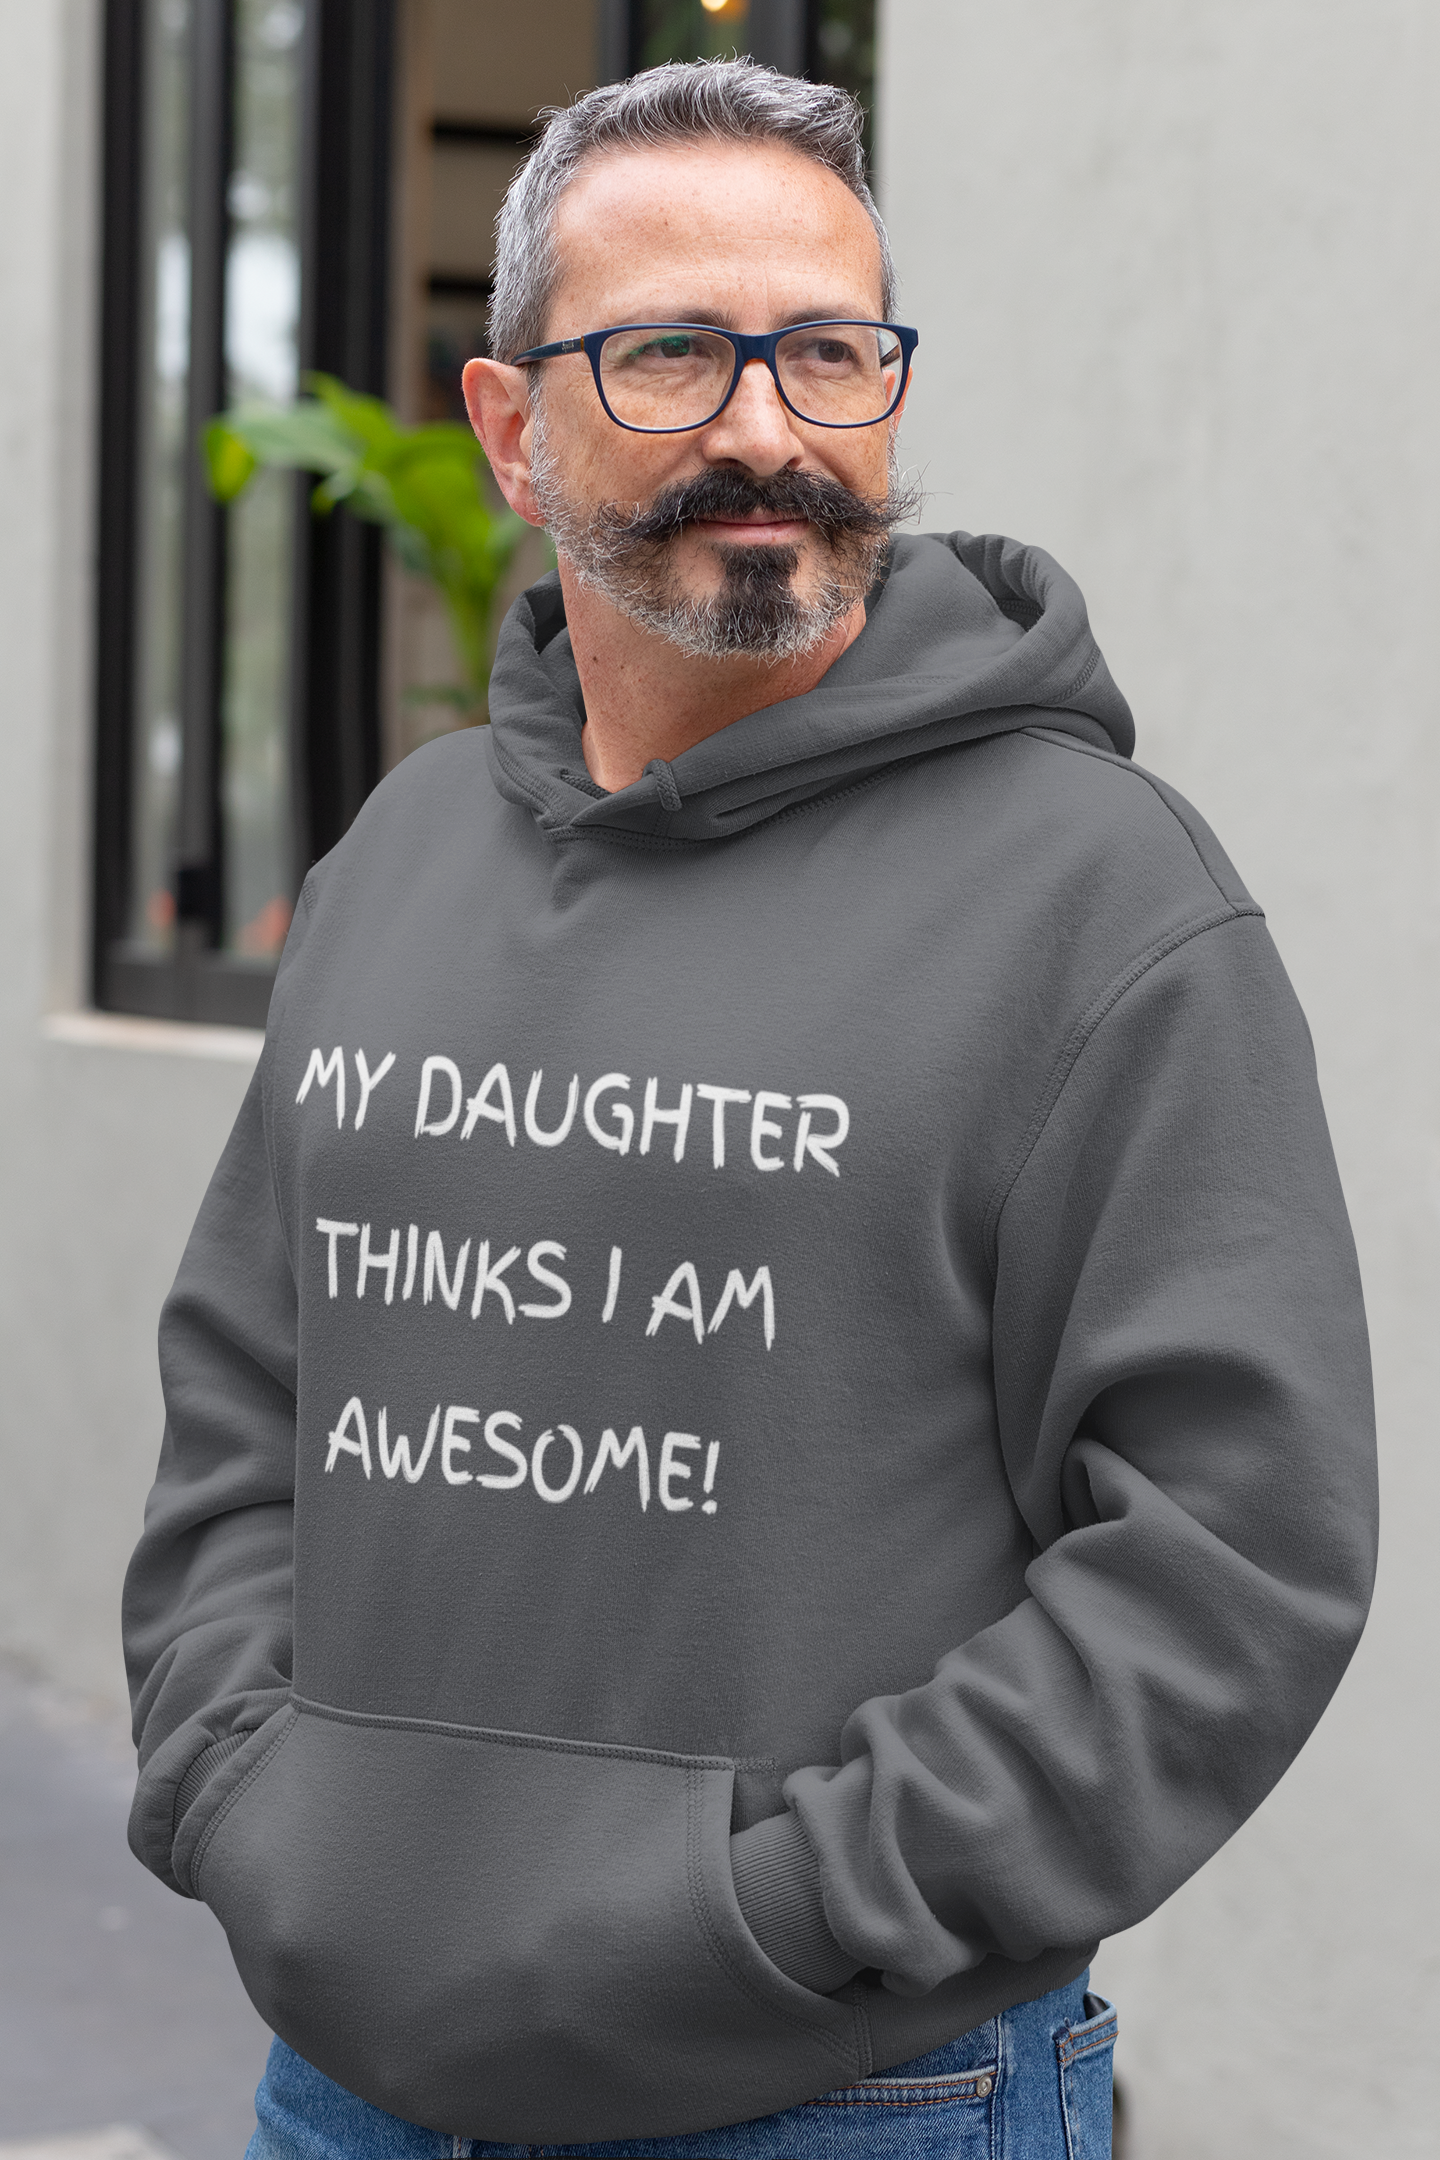 Embrace Fatherhood with Confidence in our 'My Daughter Thinks I AM AWESOME!' Men's Premium Hoodie